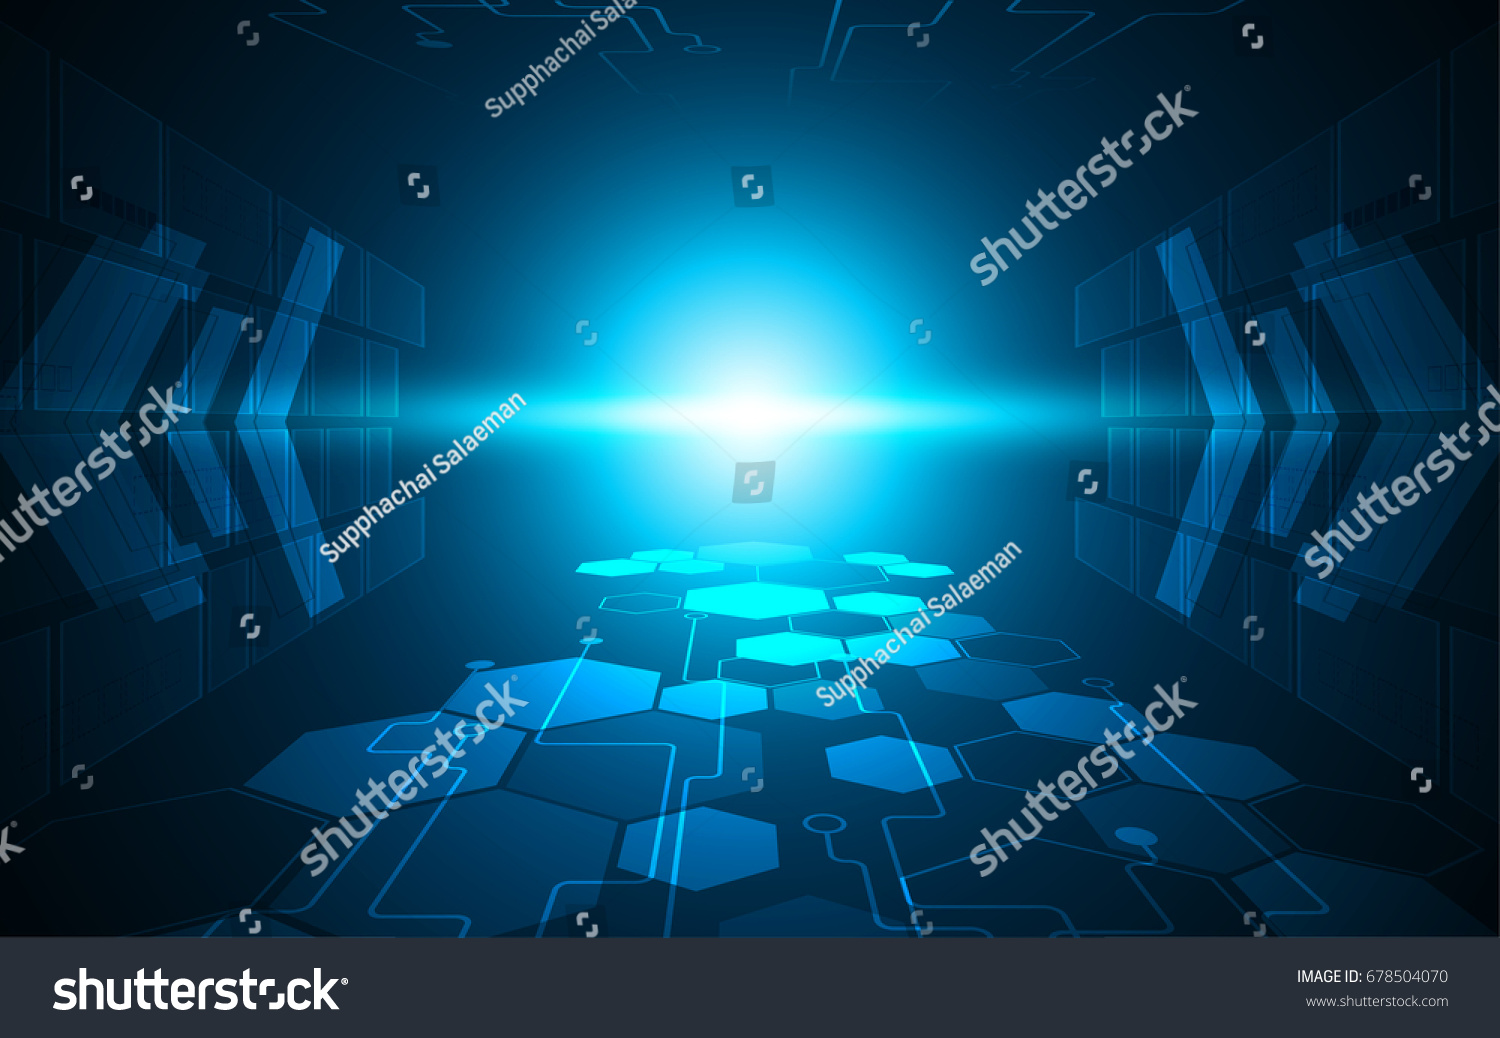 speed tunnel connection networking concept design background #678504070